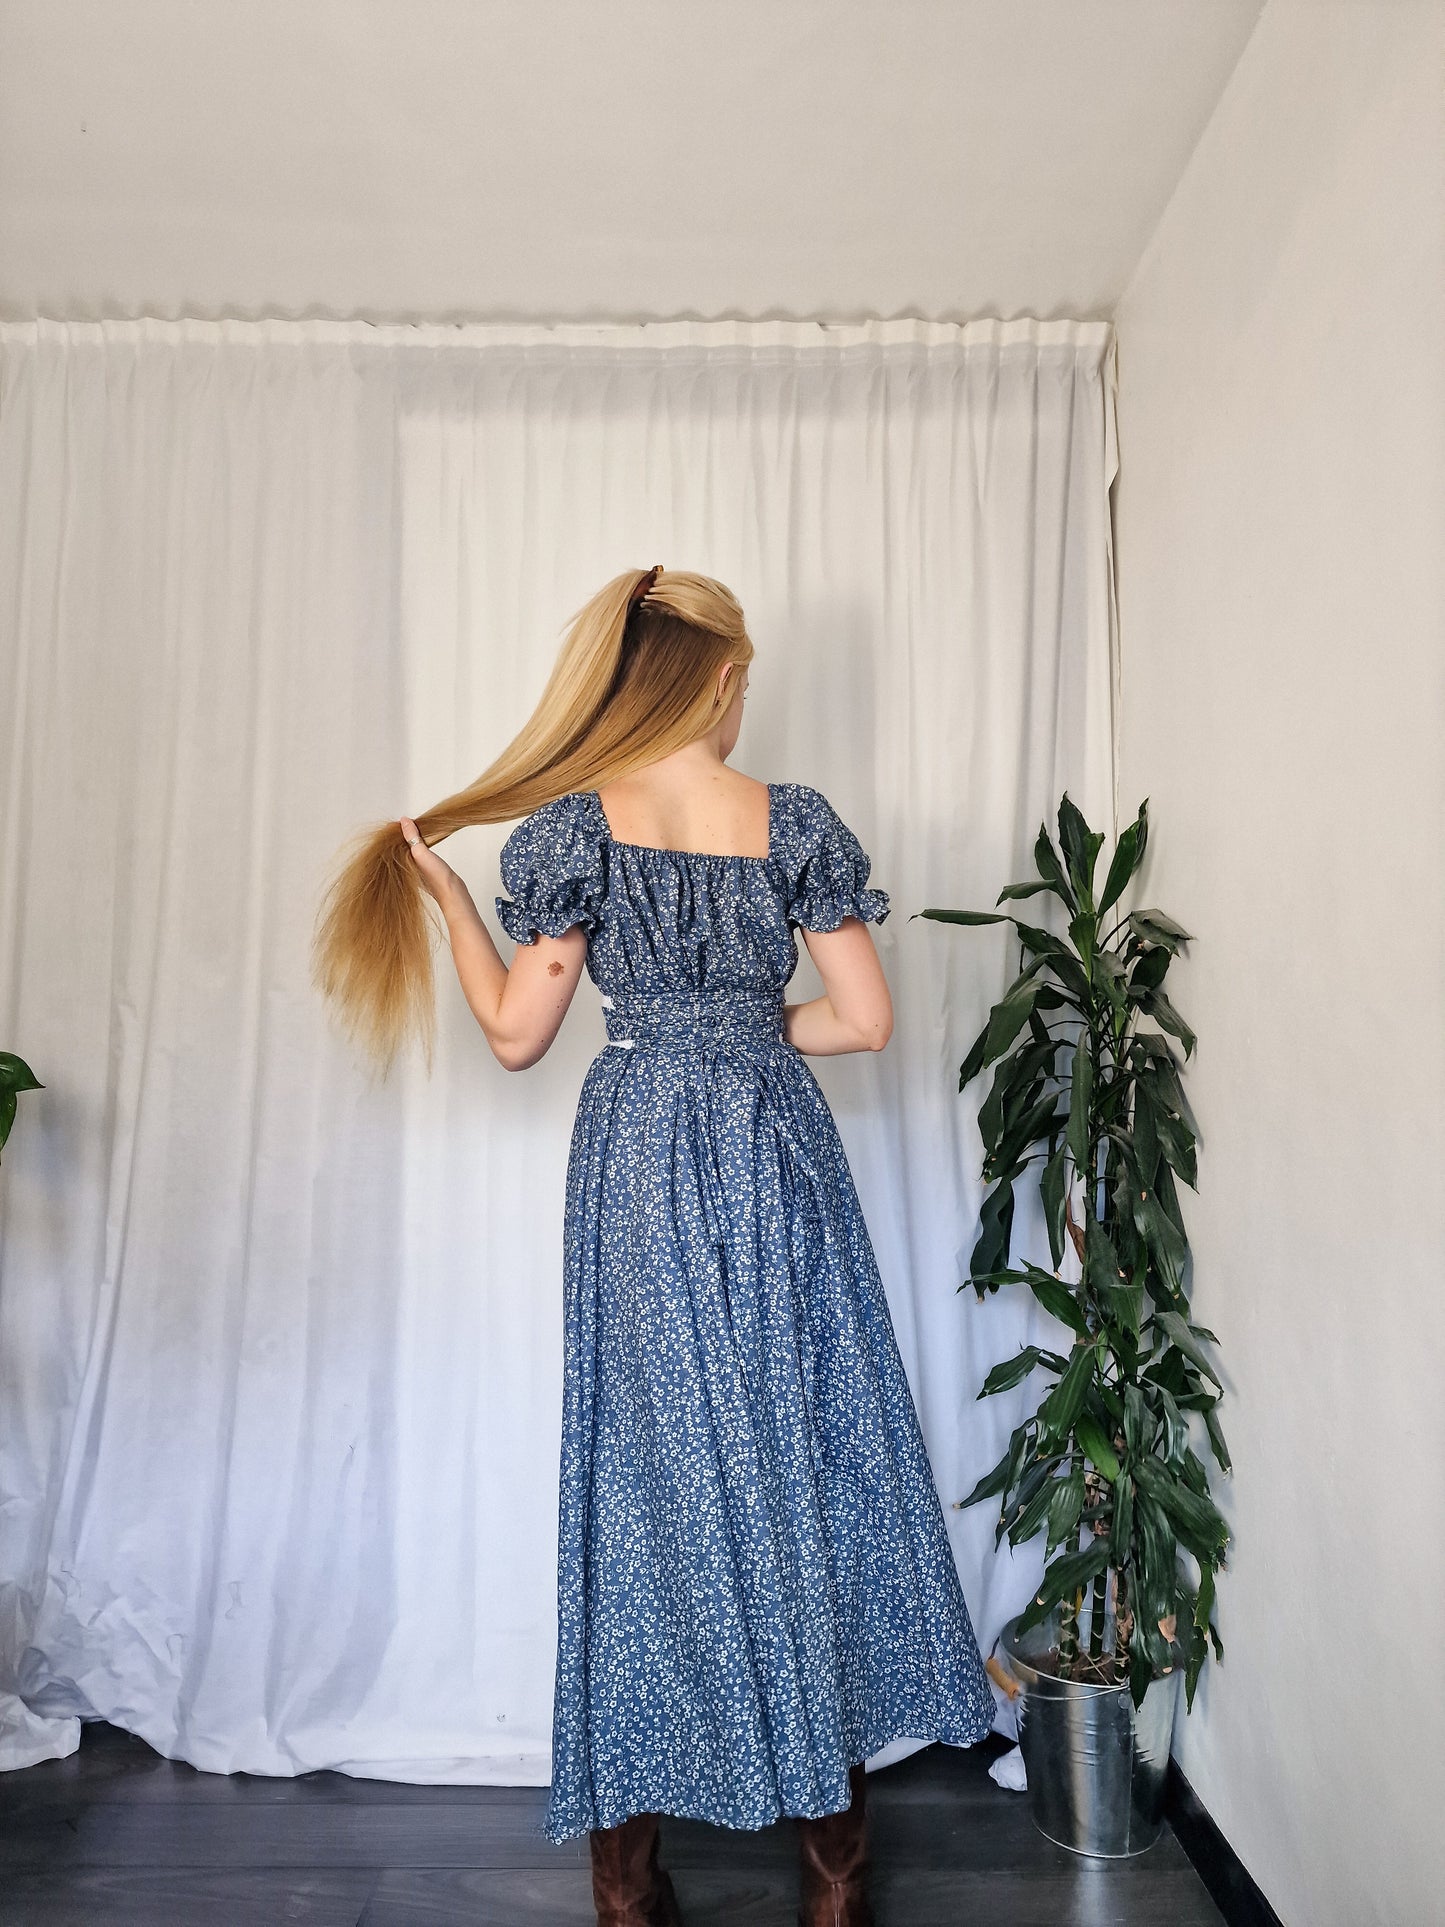 Create your own Classic Dress(Lace Up Back)